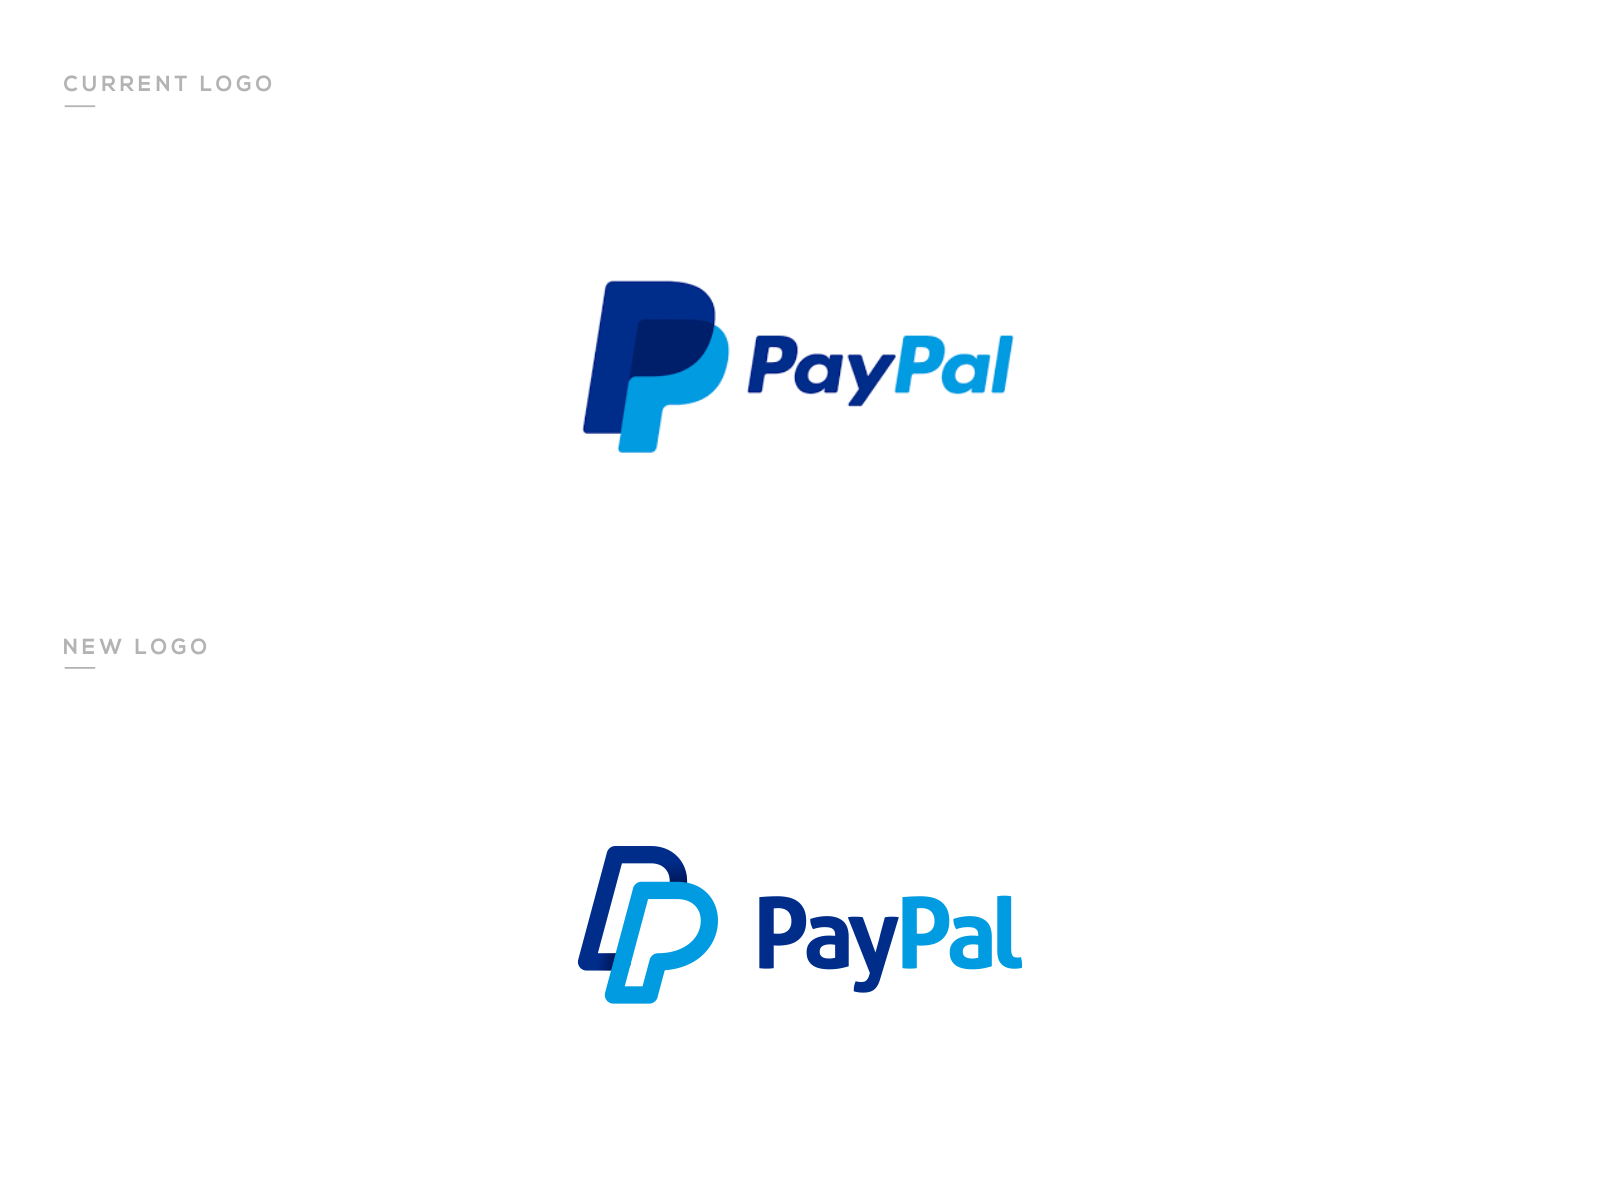 paypal logo redesign by undaru on Dribbble